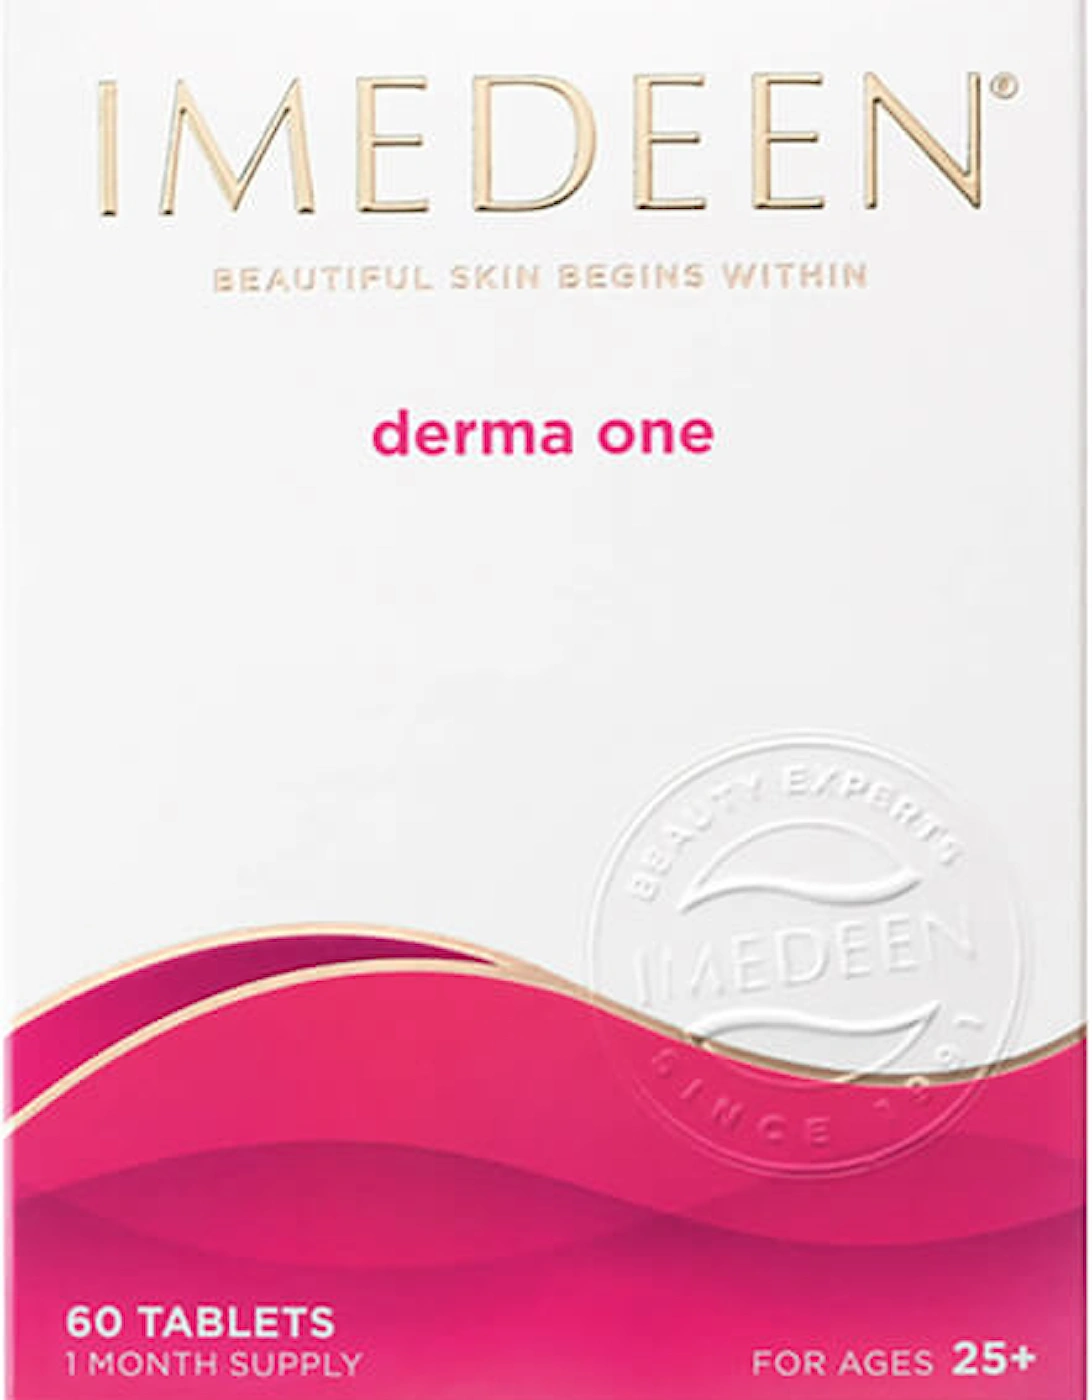 Derma One, Beauty & Skin Supplement for Women, contains Vitamin C and Zinc, 60 Tablets, Age 25+ - Imedeen, 2 of 1